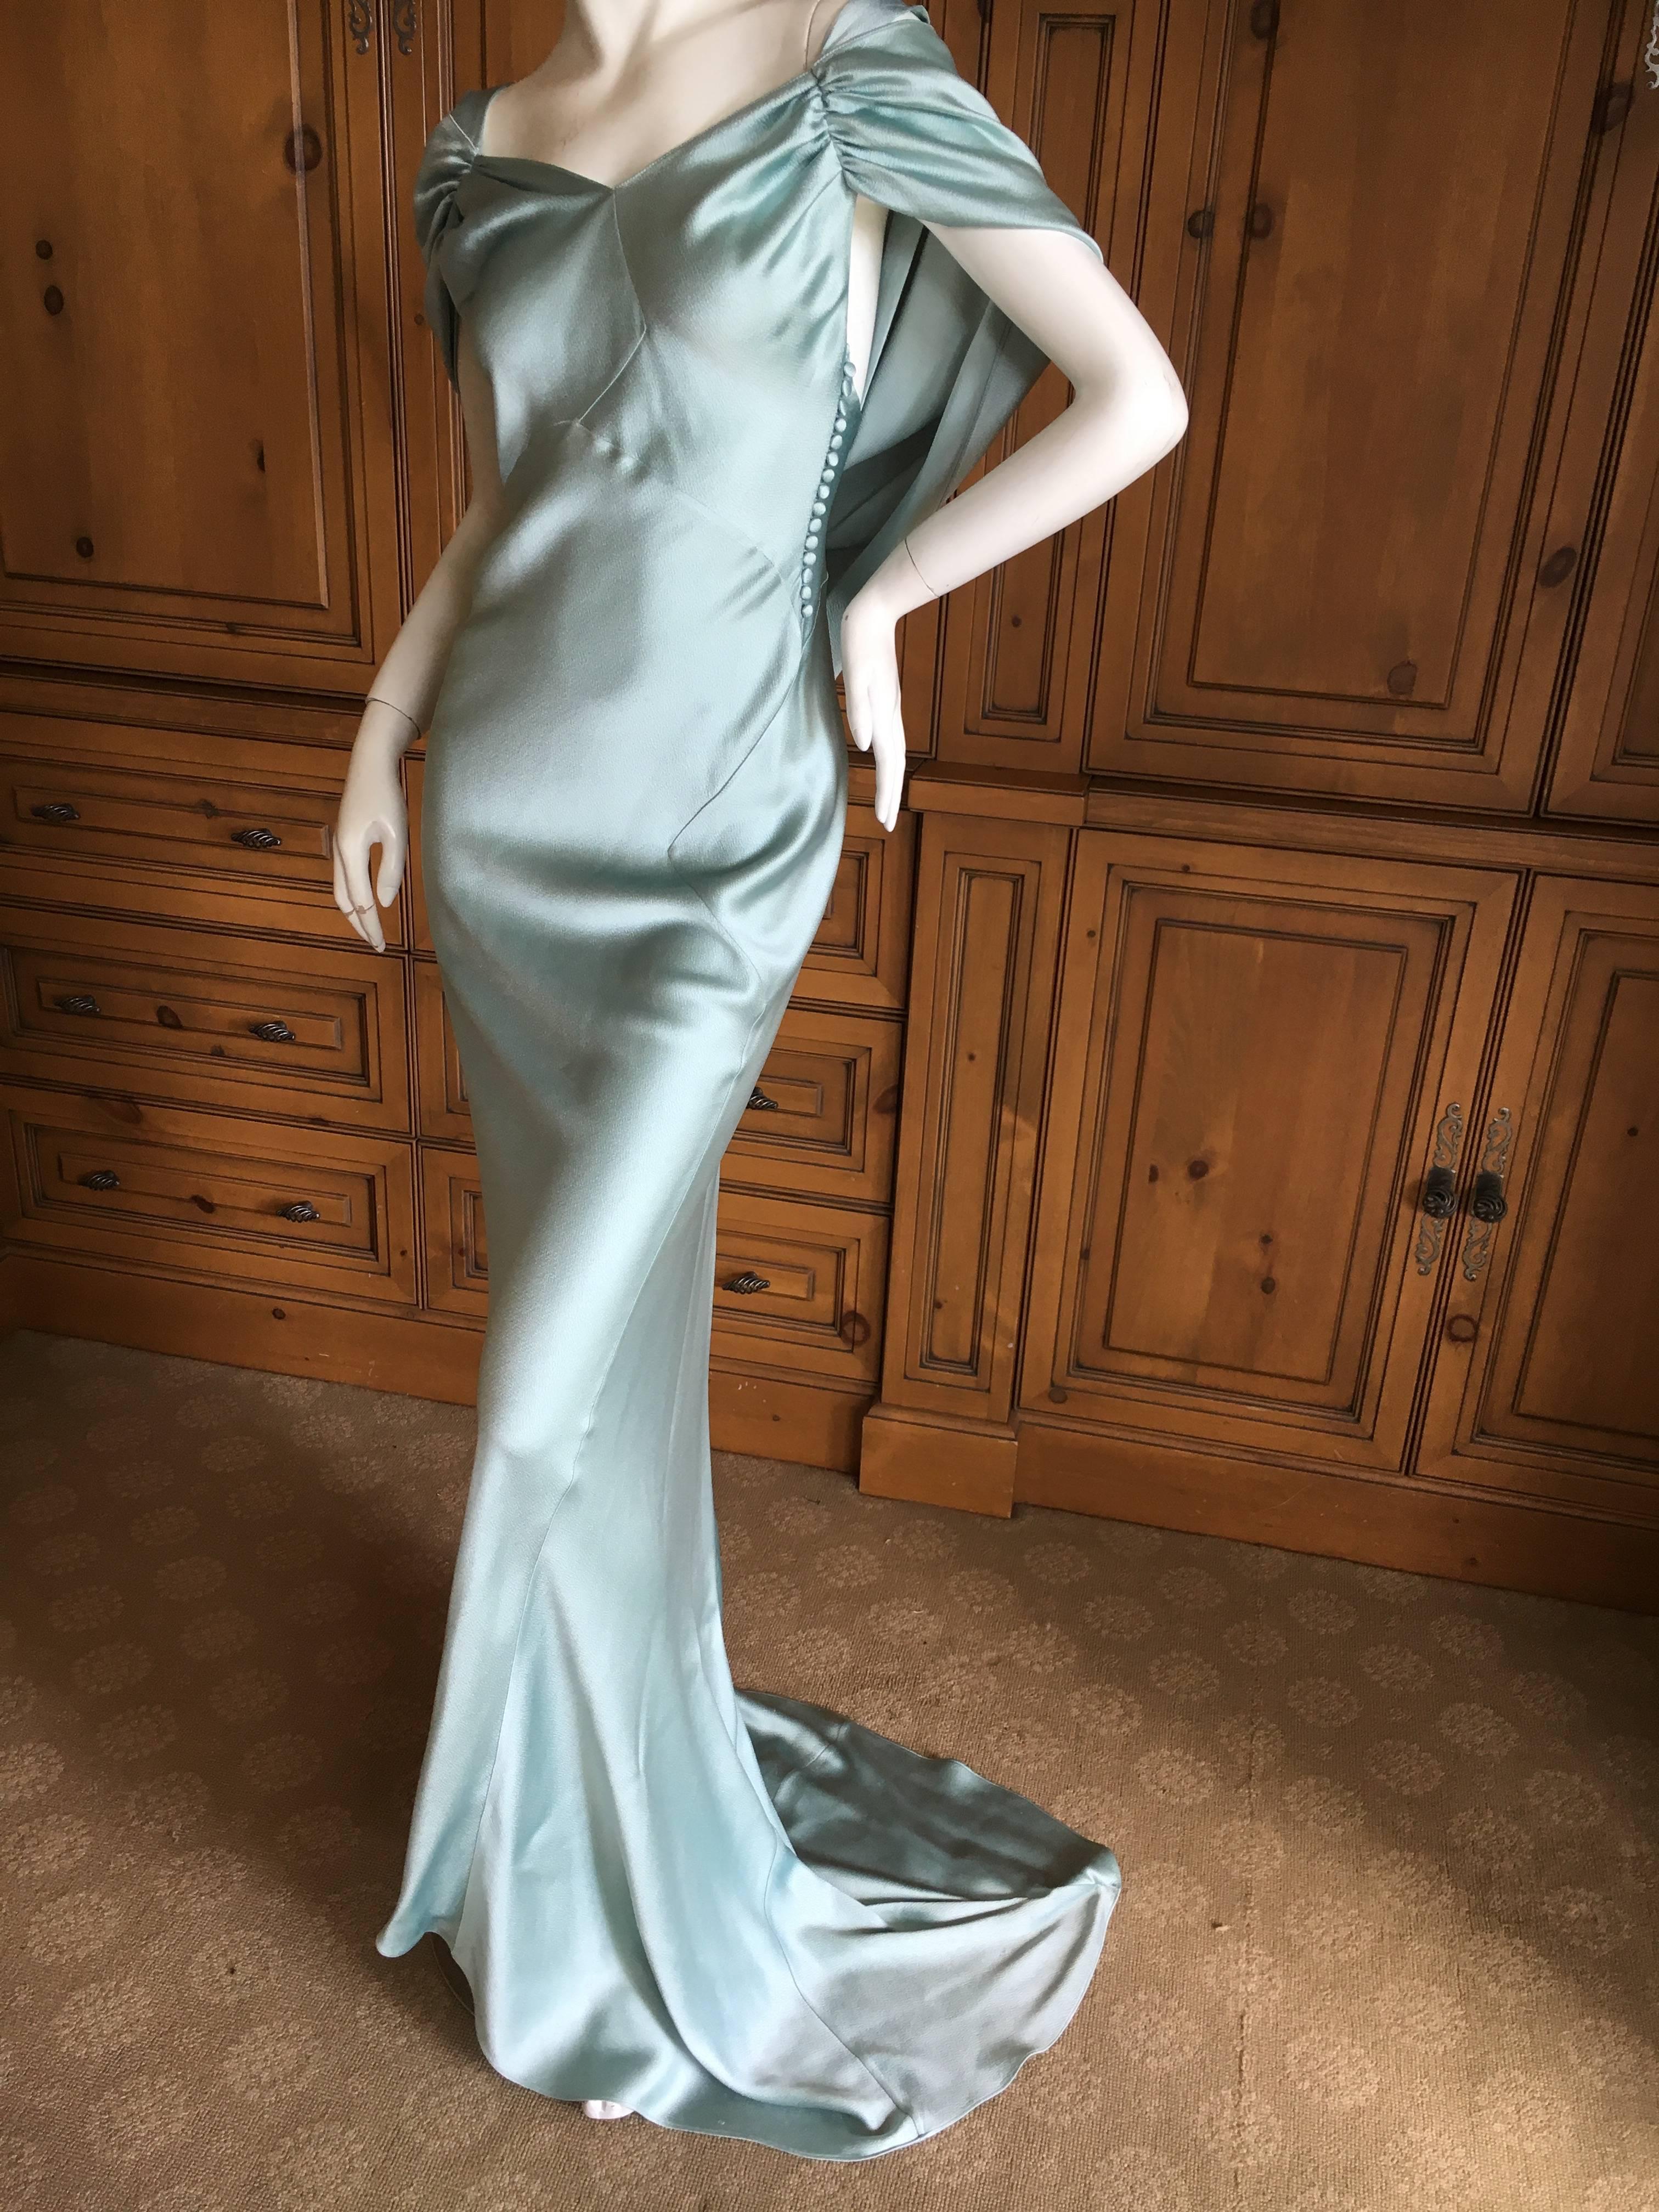 Christian Dior by John Galliano Dreamy Drape Back Turquoise Silk Evening Dress.
This is an exquisite hammered silk in a luscious shade of Tiffany or light Robin's Egg blue.
Bias cut with a draped back and train, this is classic Galliano for